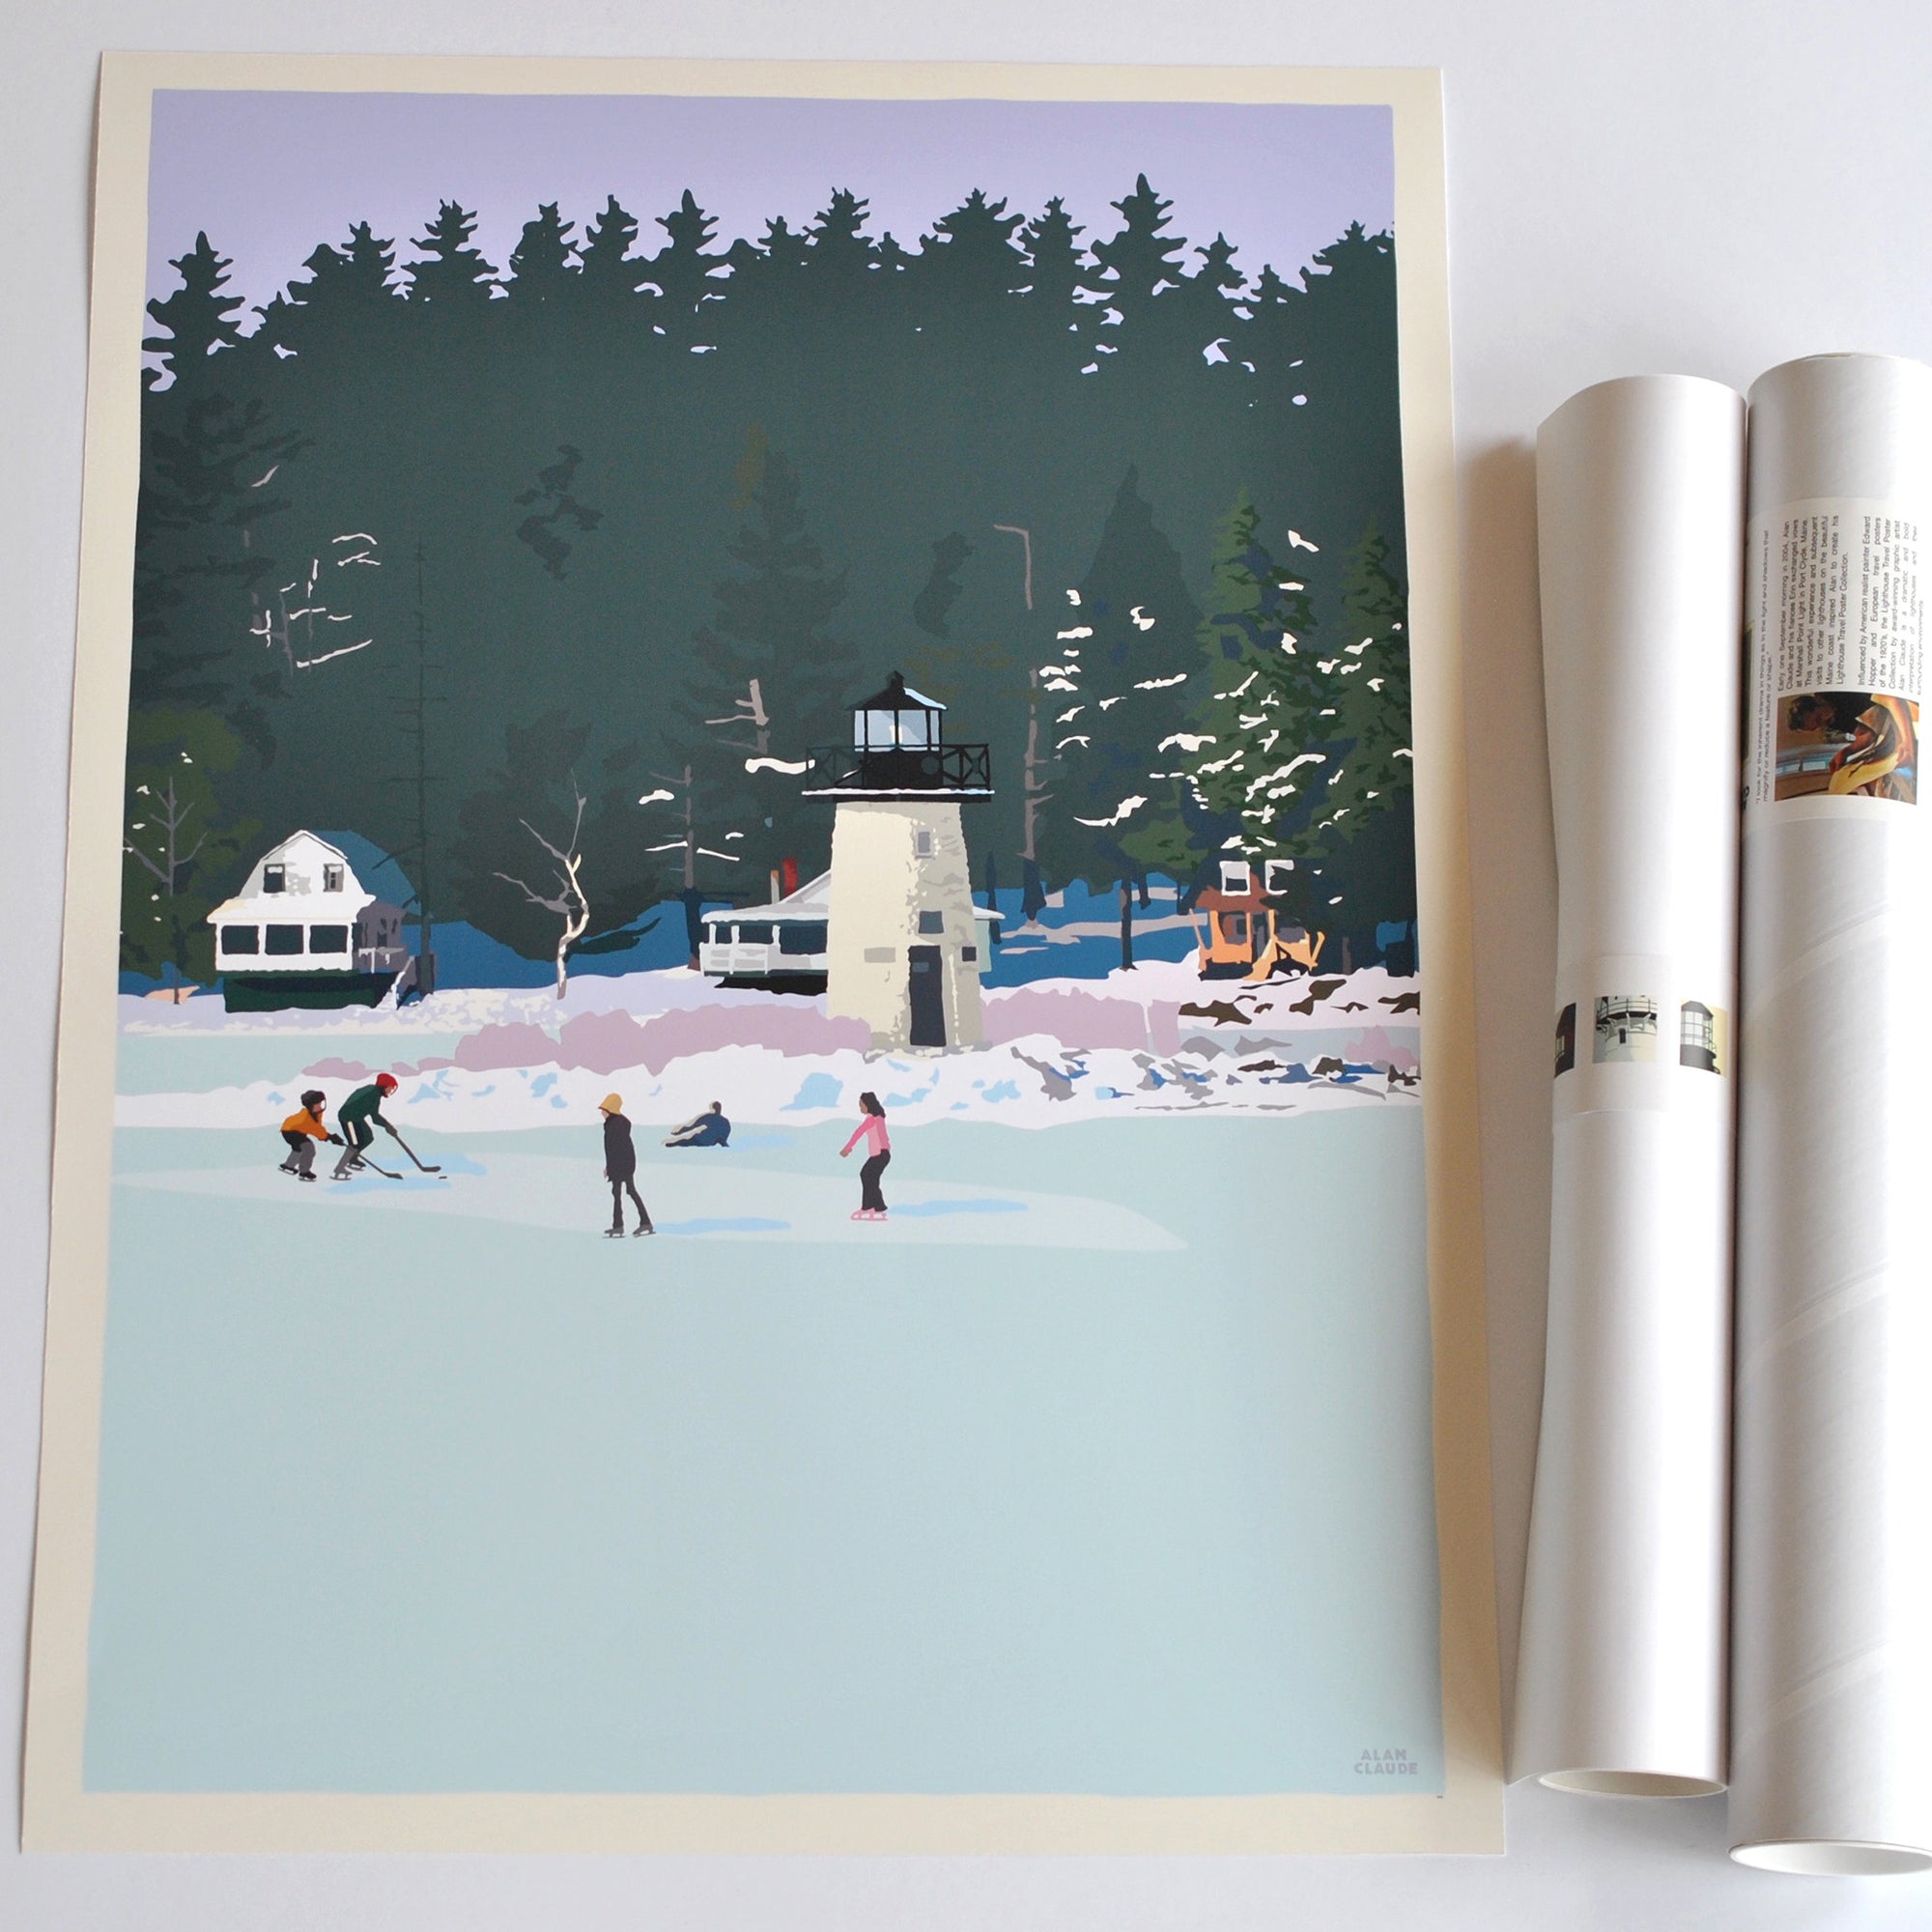 Ice Skating At Ladies Delight Lighthouse Art Print 18" x 24" Wall Poster By Alan Claude - Maine